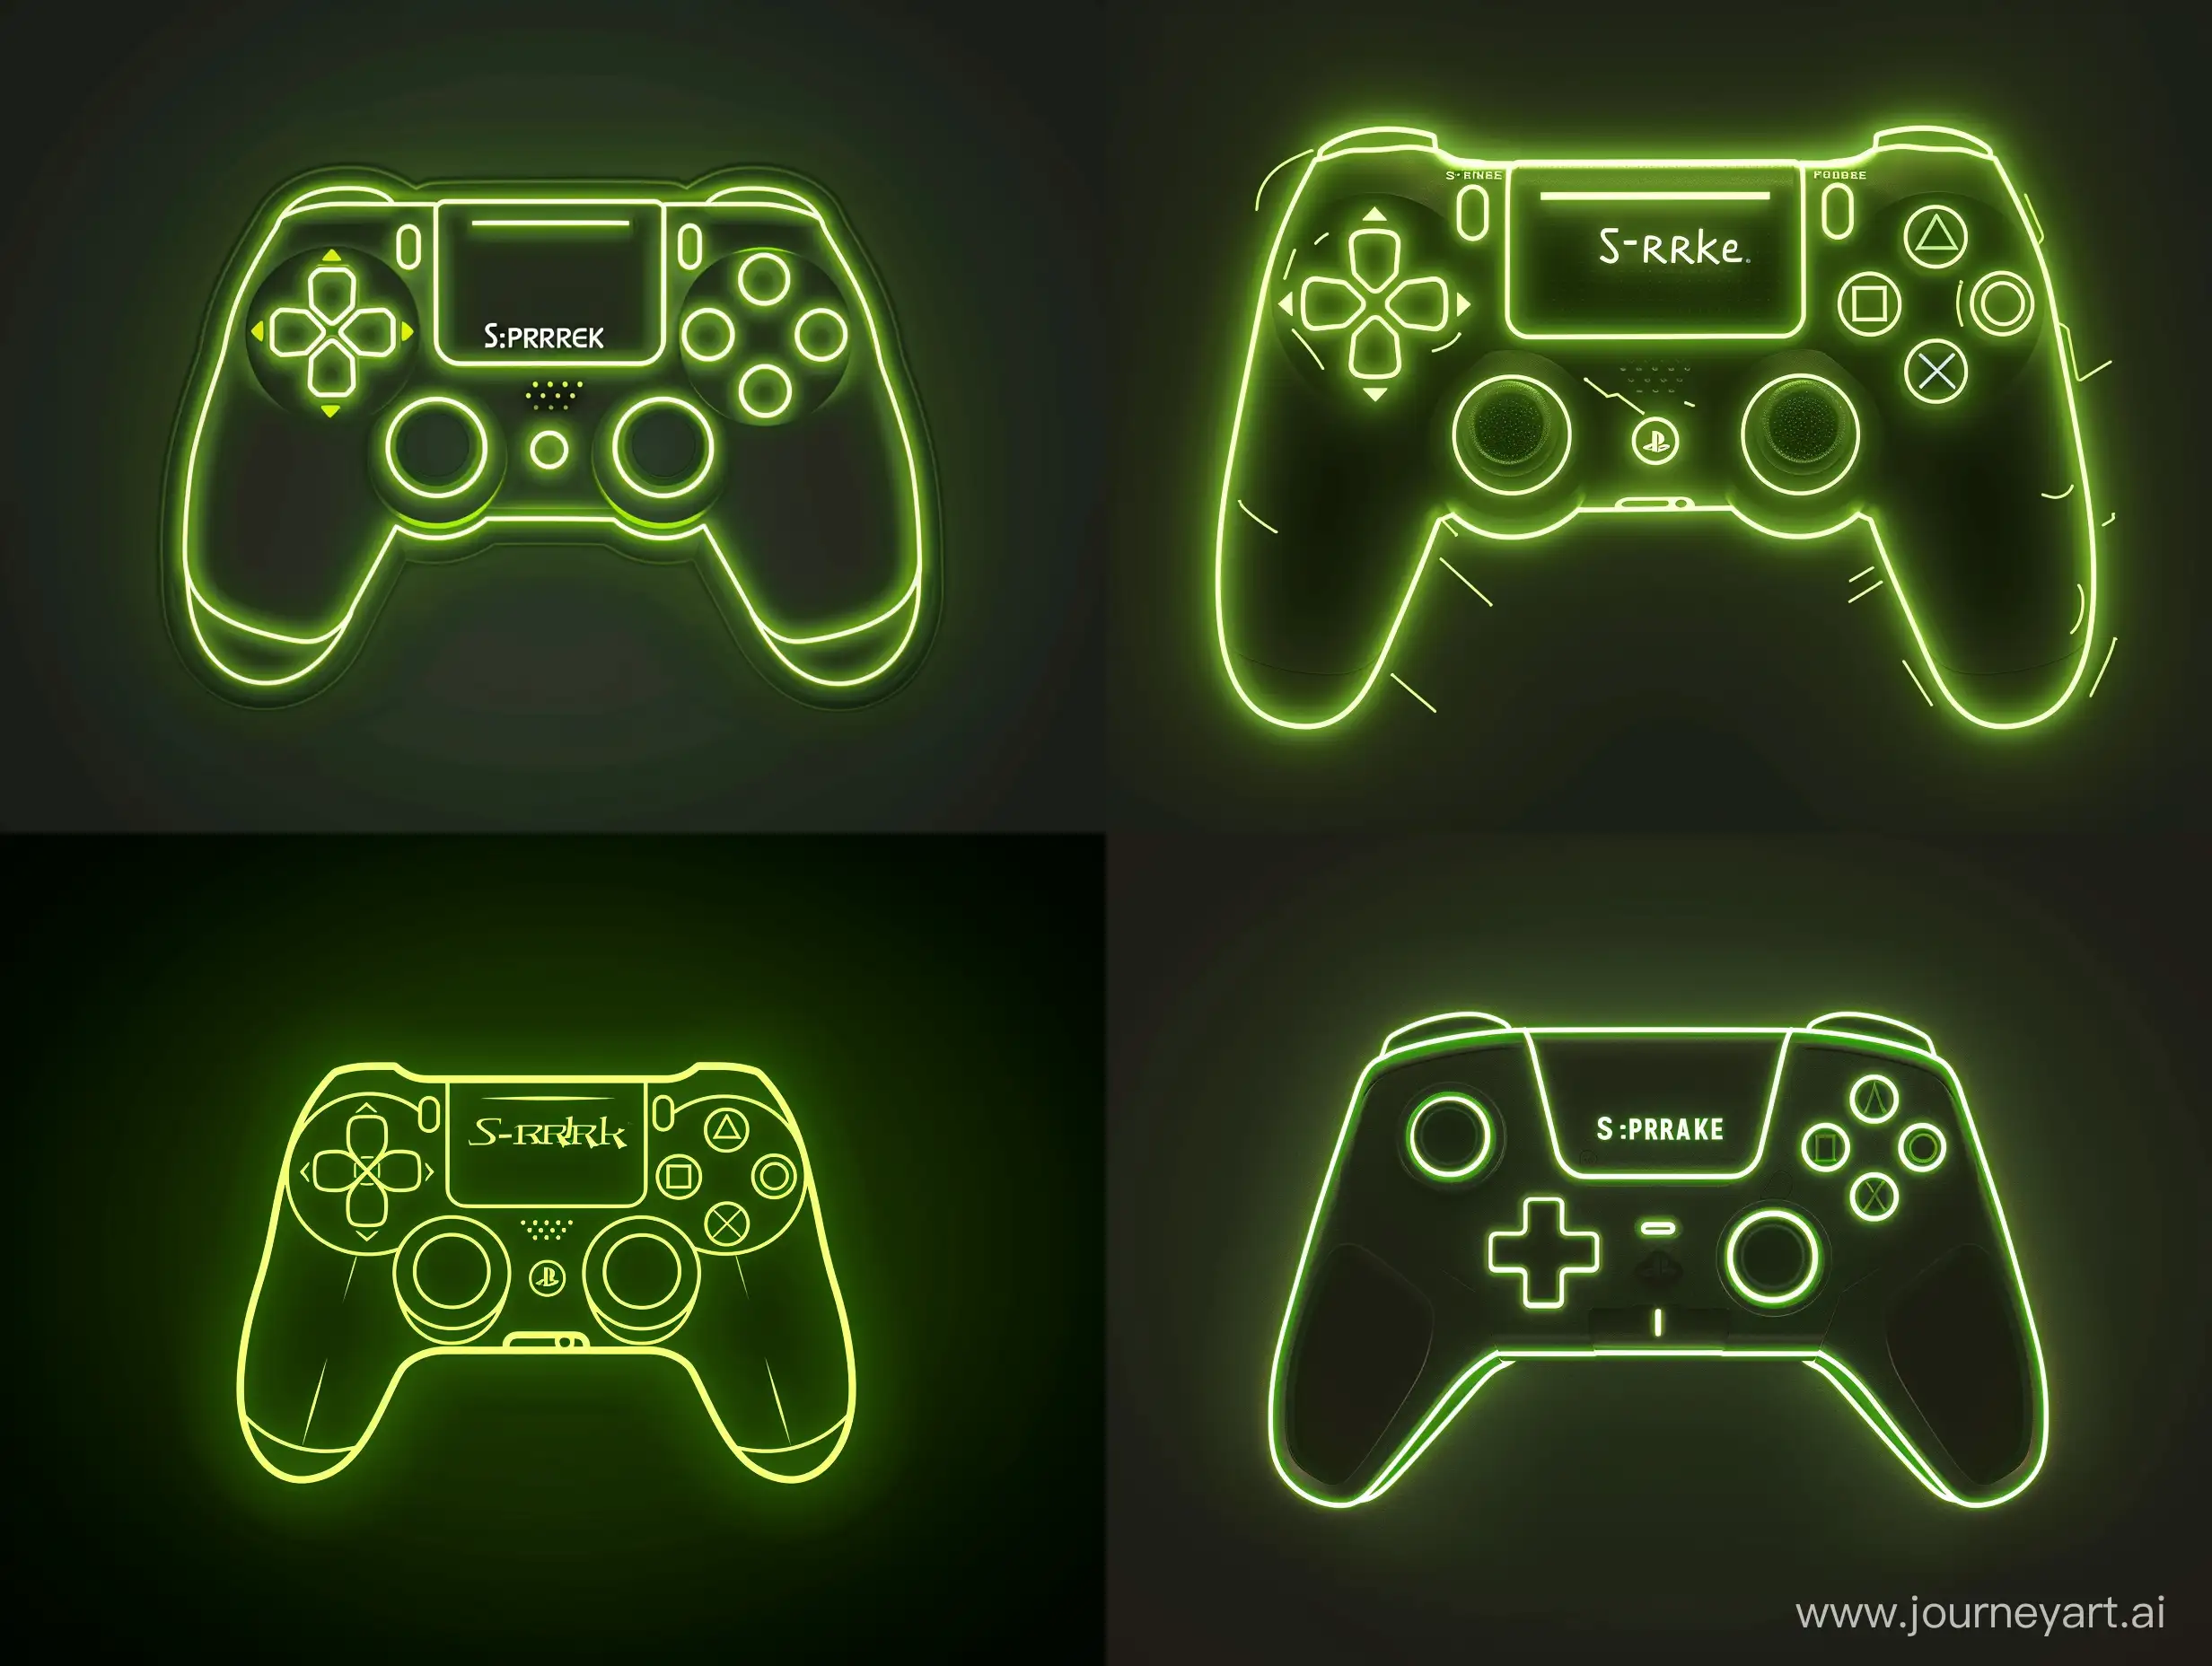 The silhouette of the gamepad with a bright green neon outline. Inside the gamepad is the name of the channel "S_Brake", also made in neon style to match the overall design. The outline of the gamepad can be outlined with thin green lines to emphasize its shape.